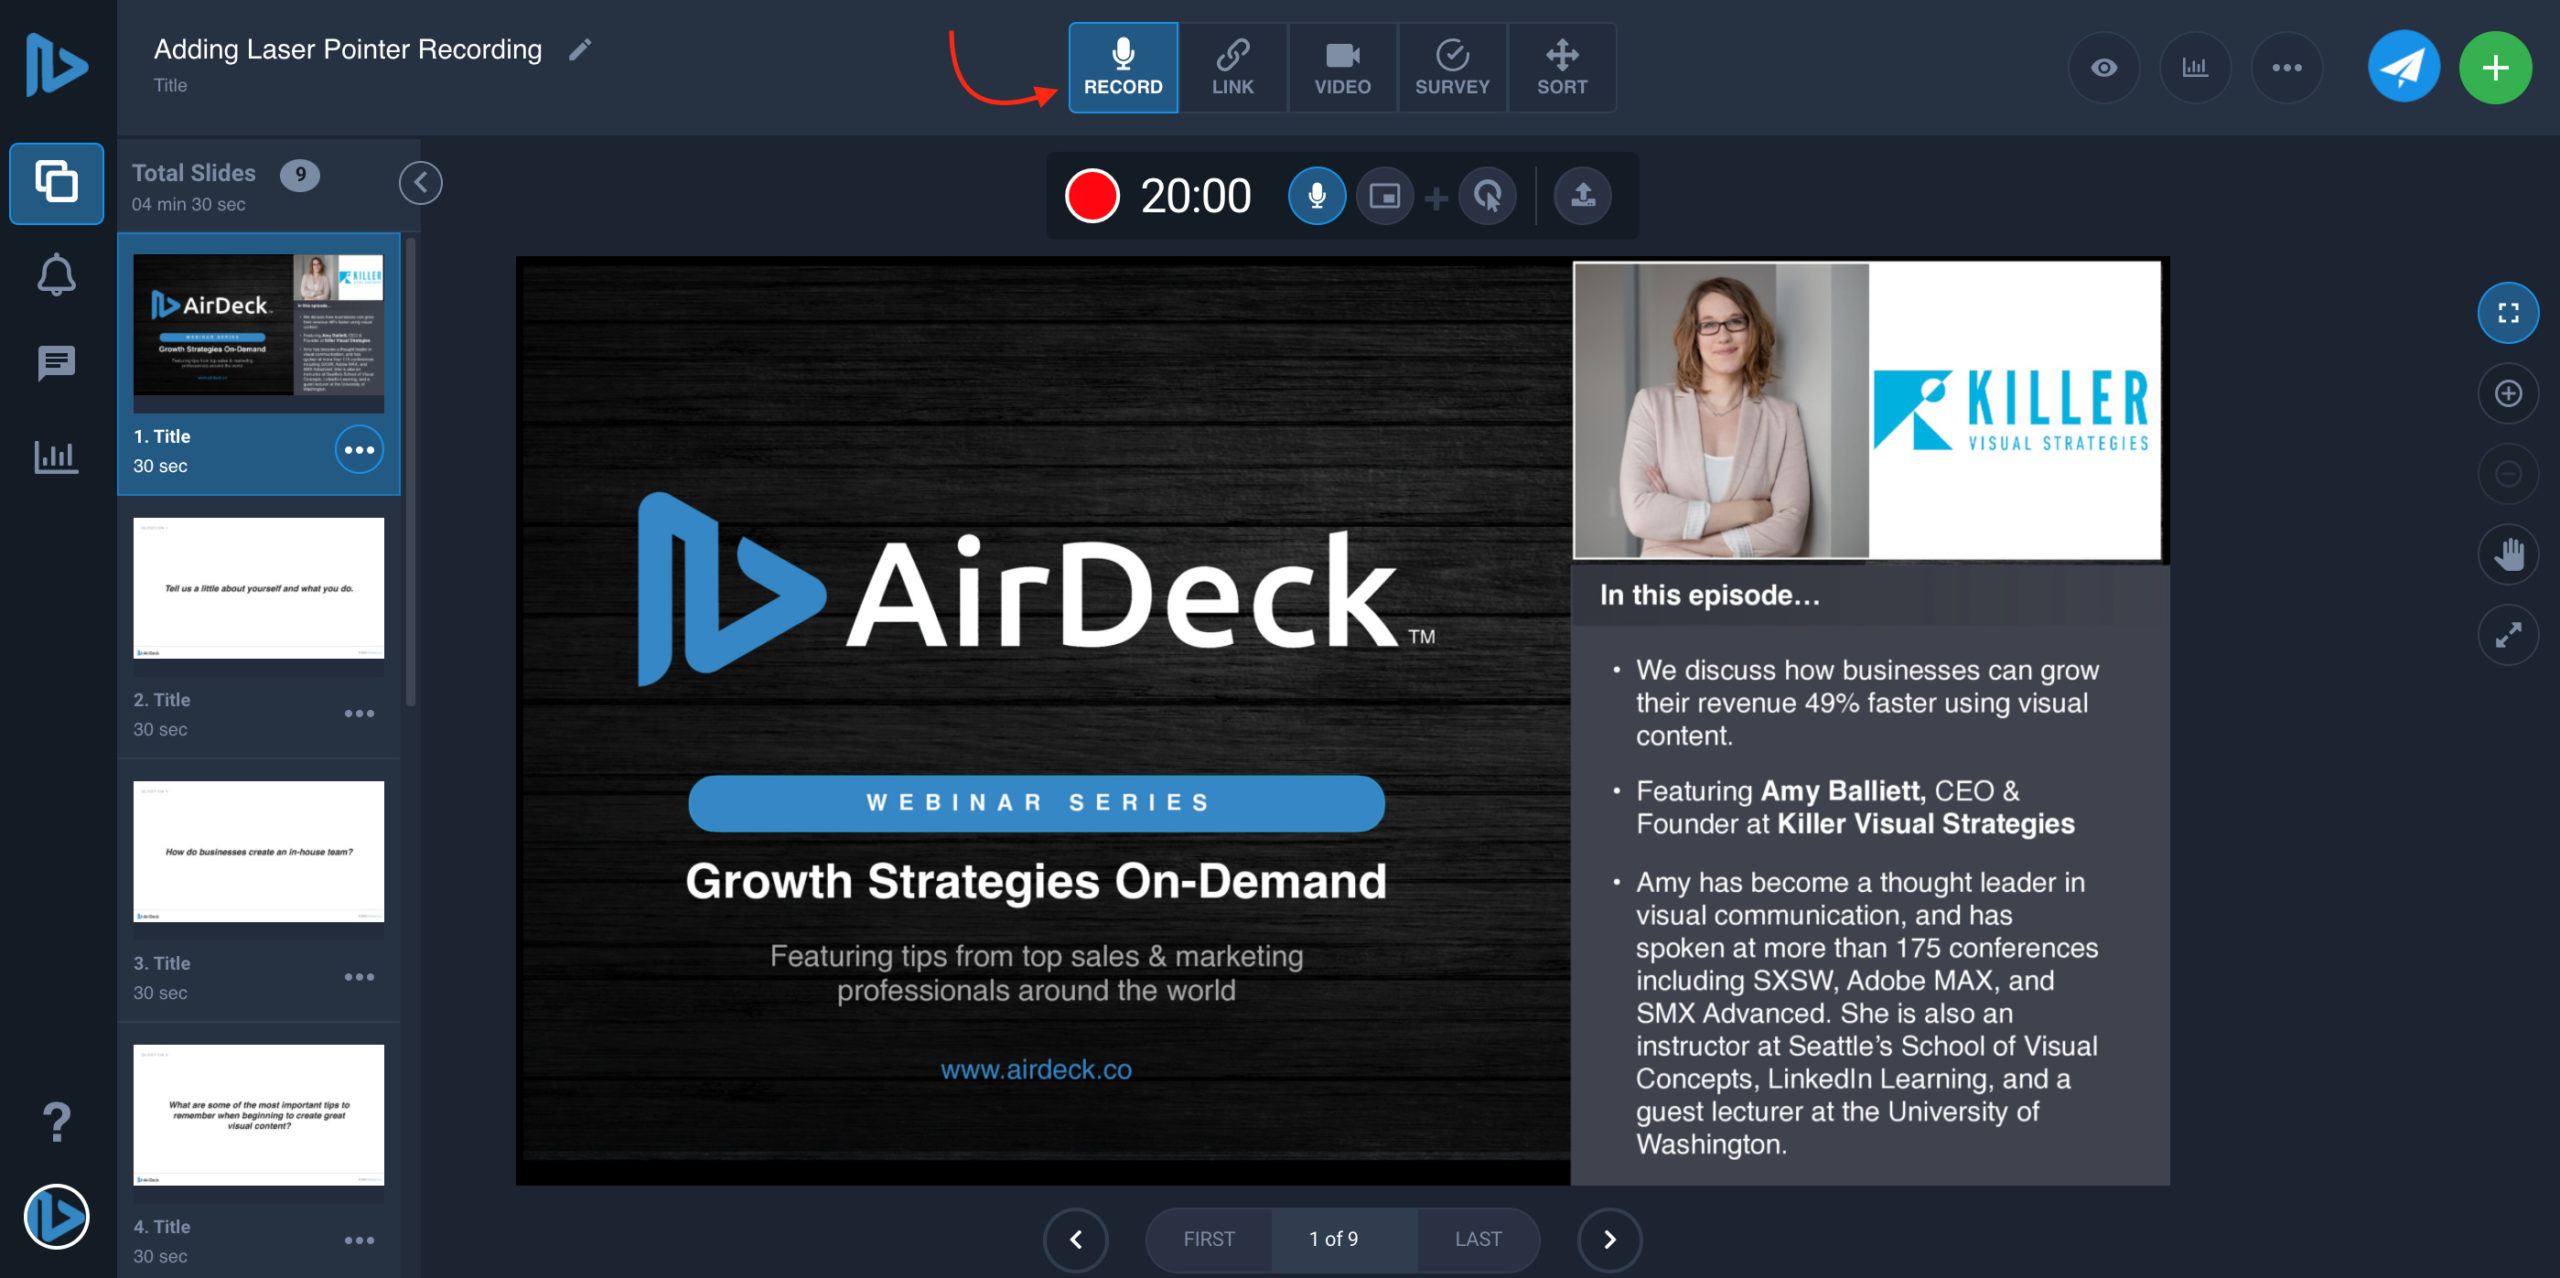 Arrow pointing to record button on AirDeck user interface